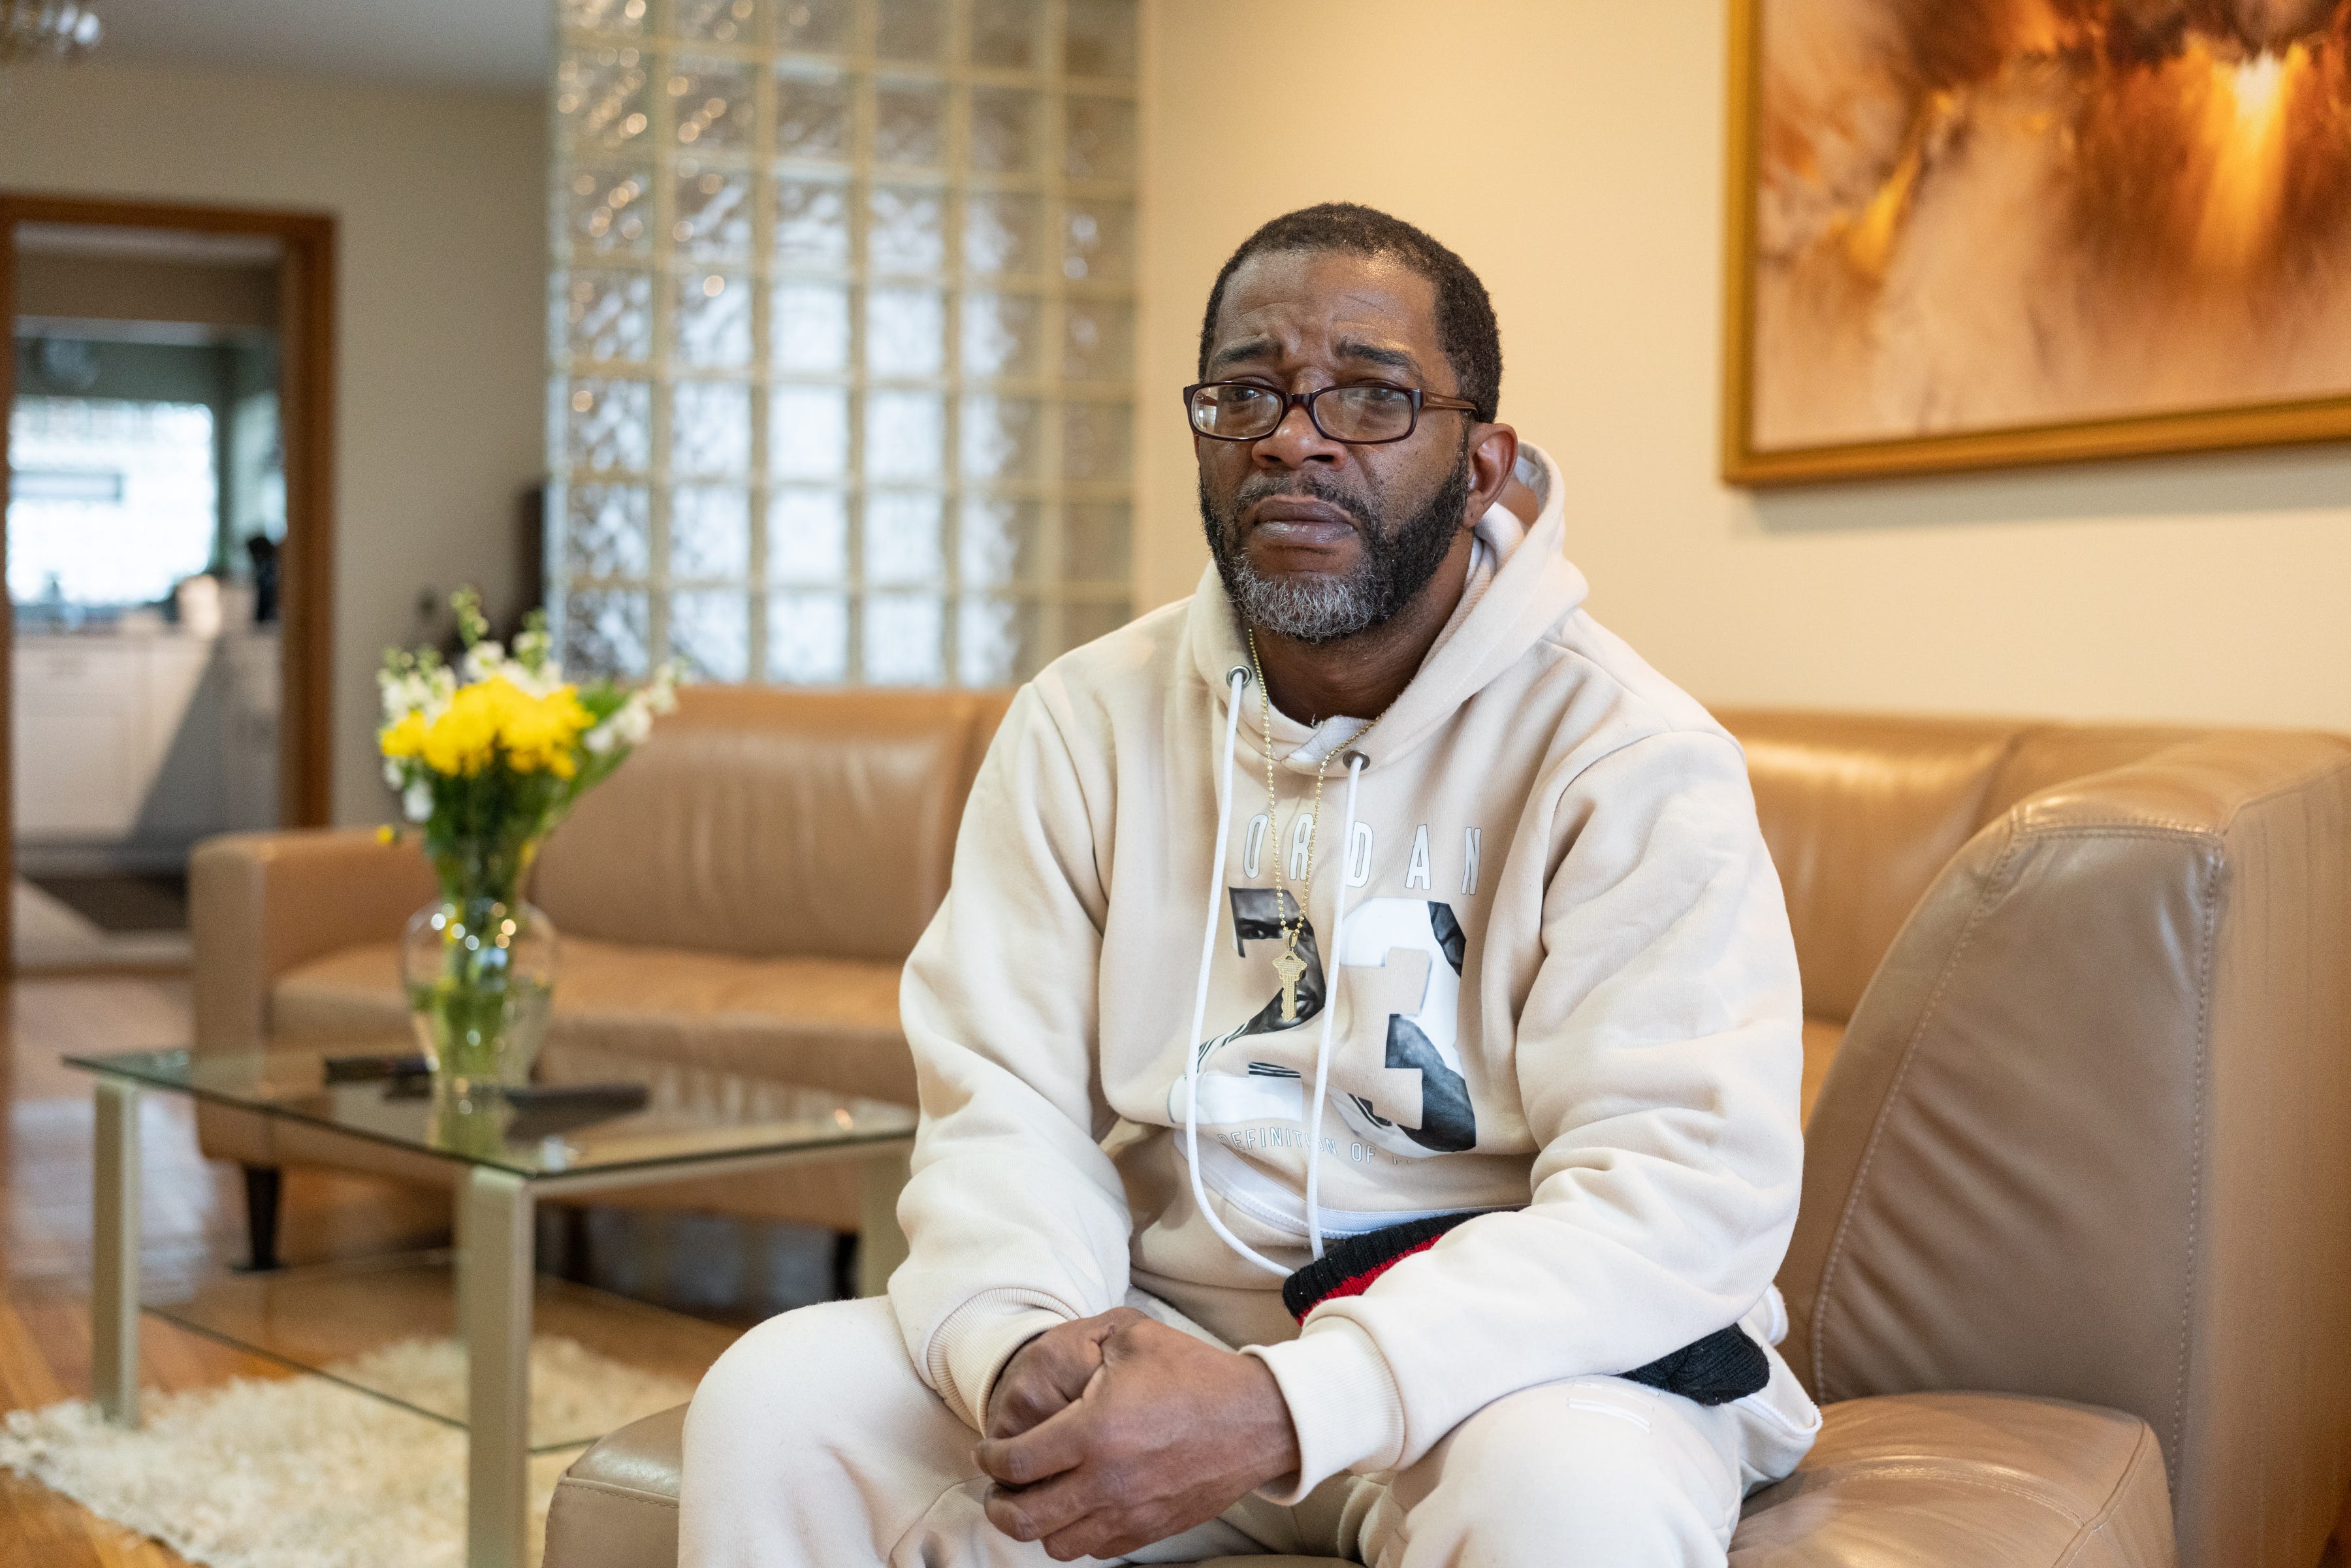 Derrick Mapp, 49, sits at his mother’s home in the Calumet Heights neighborhood of Chicago on Dec. 11, 2022.